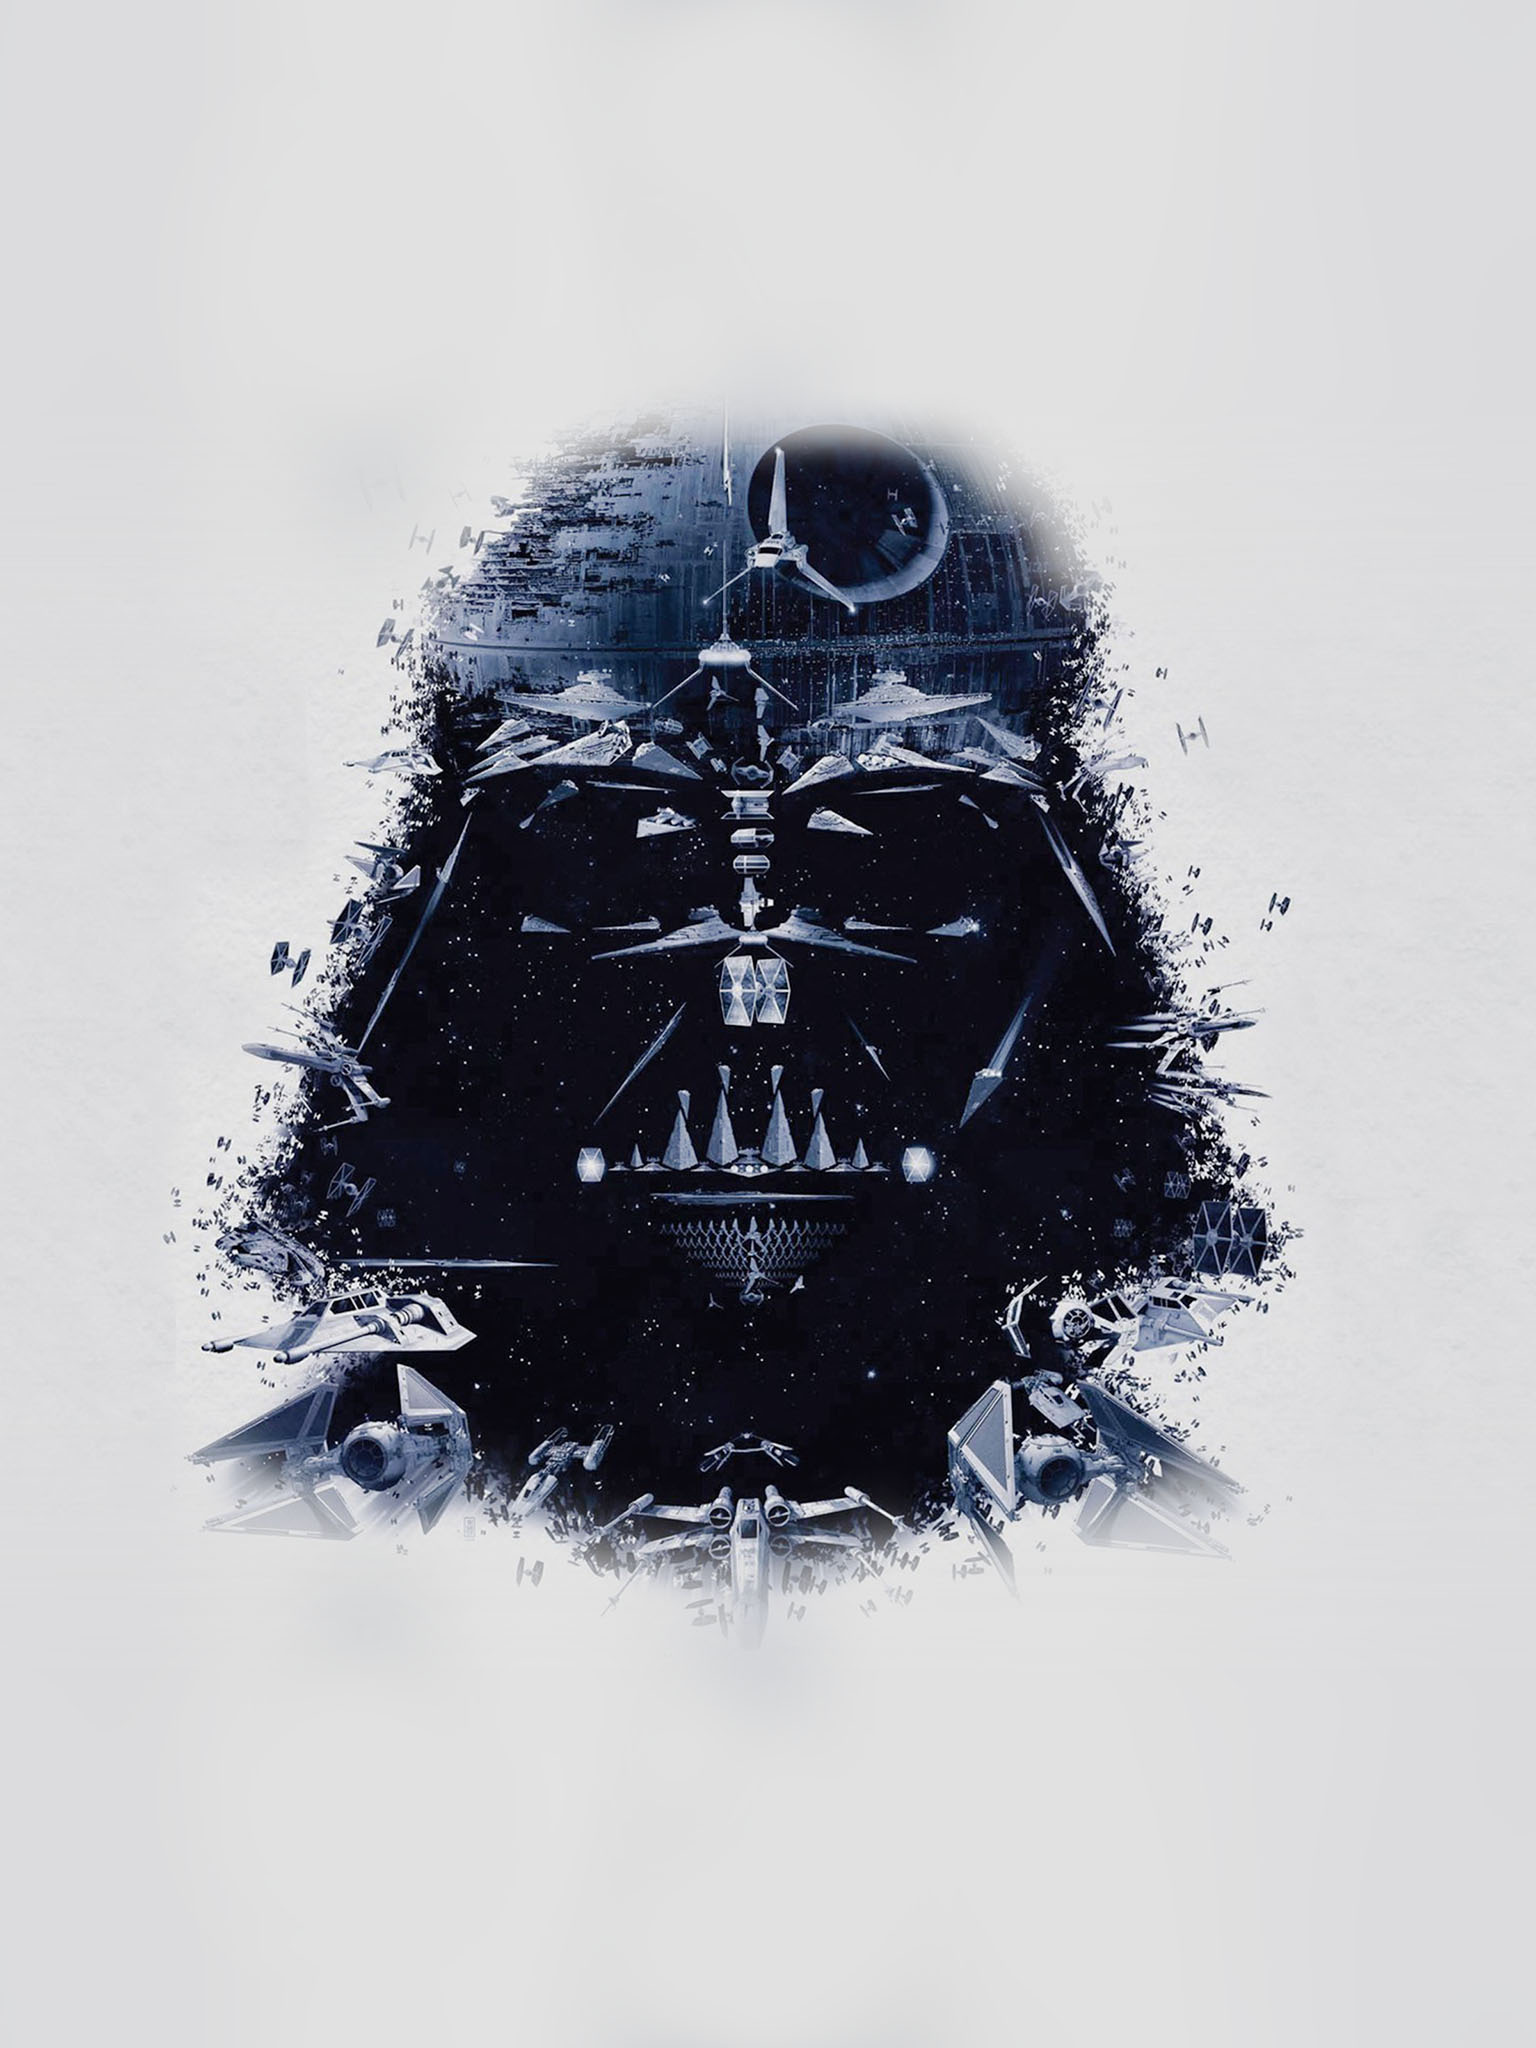 Darth Vader: Anakin Skywalker, Was seduced by the dark side of the Force. 1540x2050 HD Wallpaper.